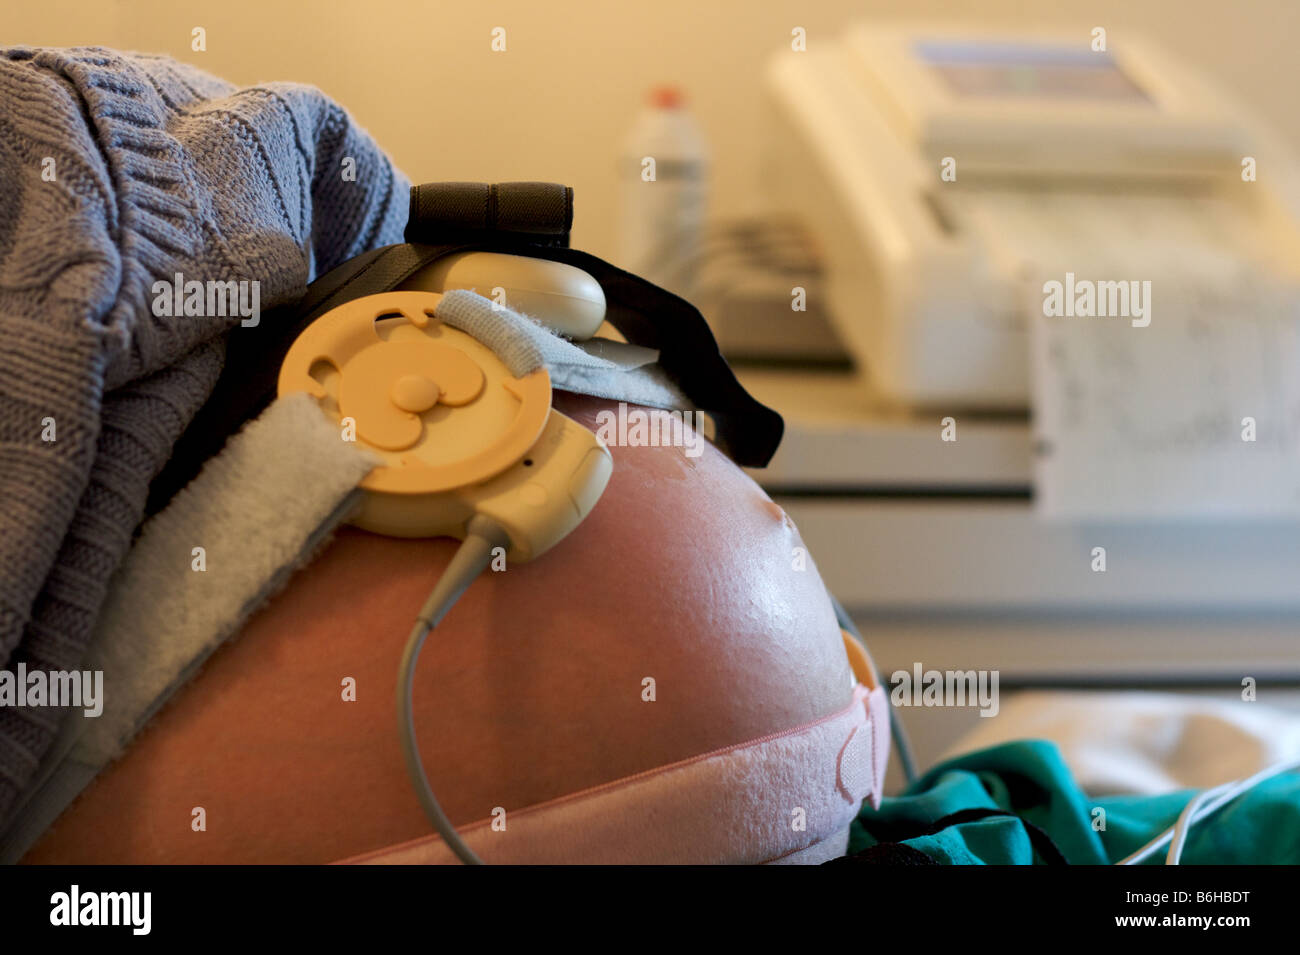 A close-up of a pregnant belly with a fetal monitor attached. Stock Photo